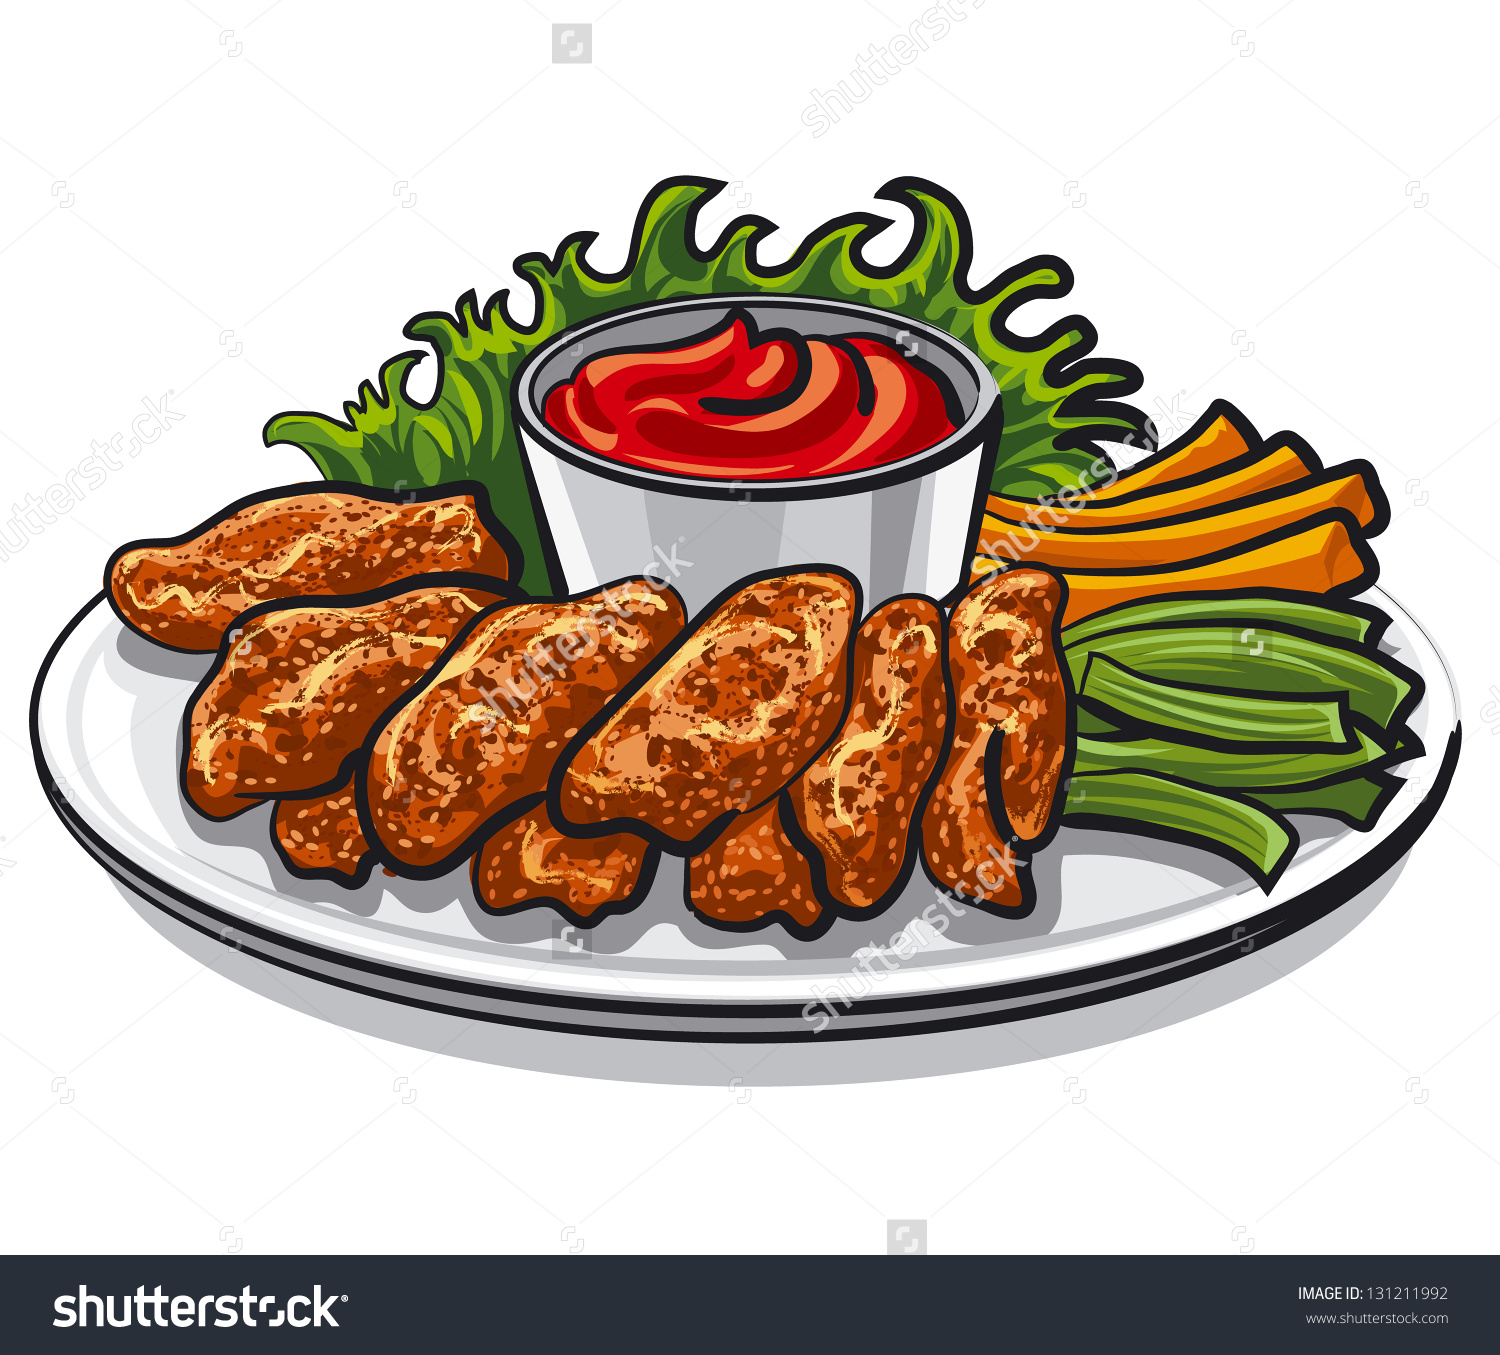 Chicken Wing Clipart. Save to a lightbox